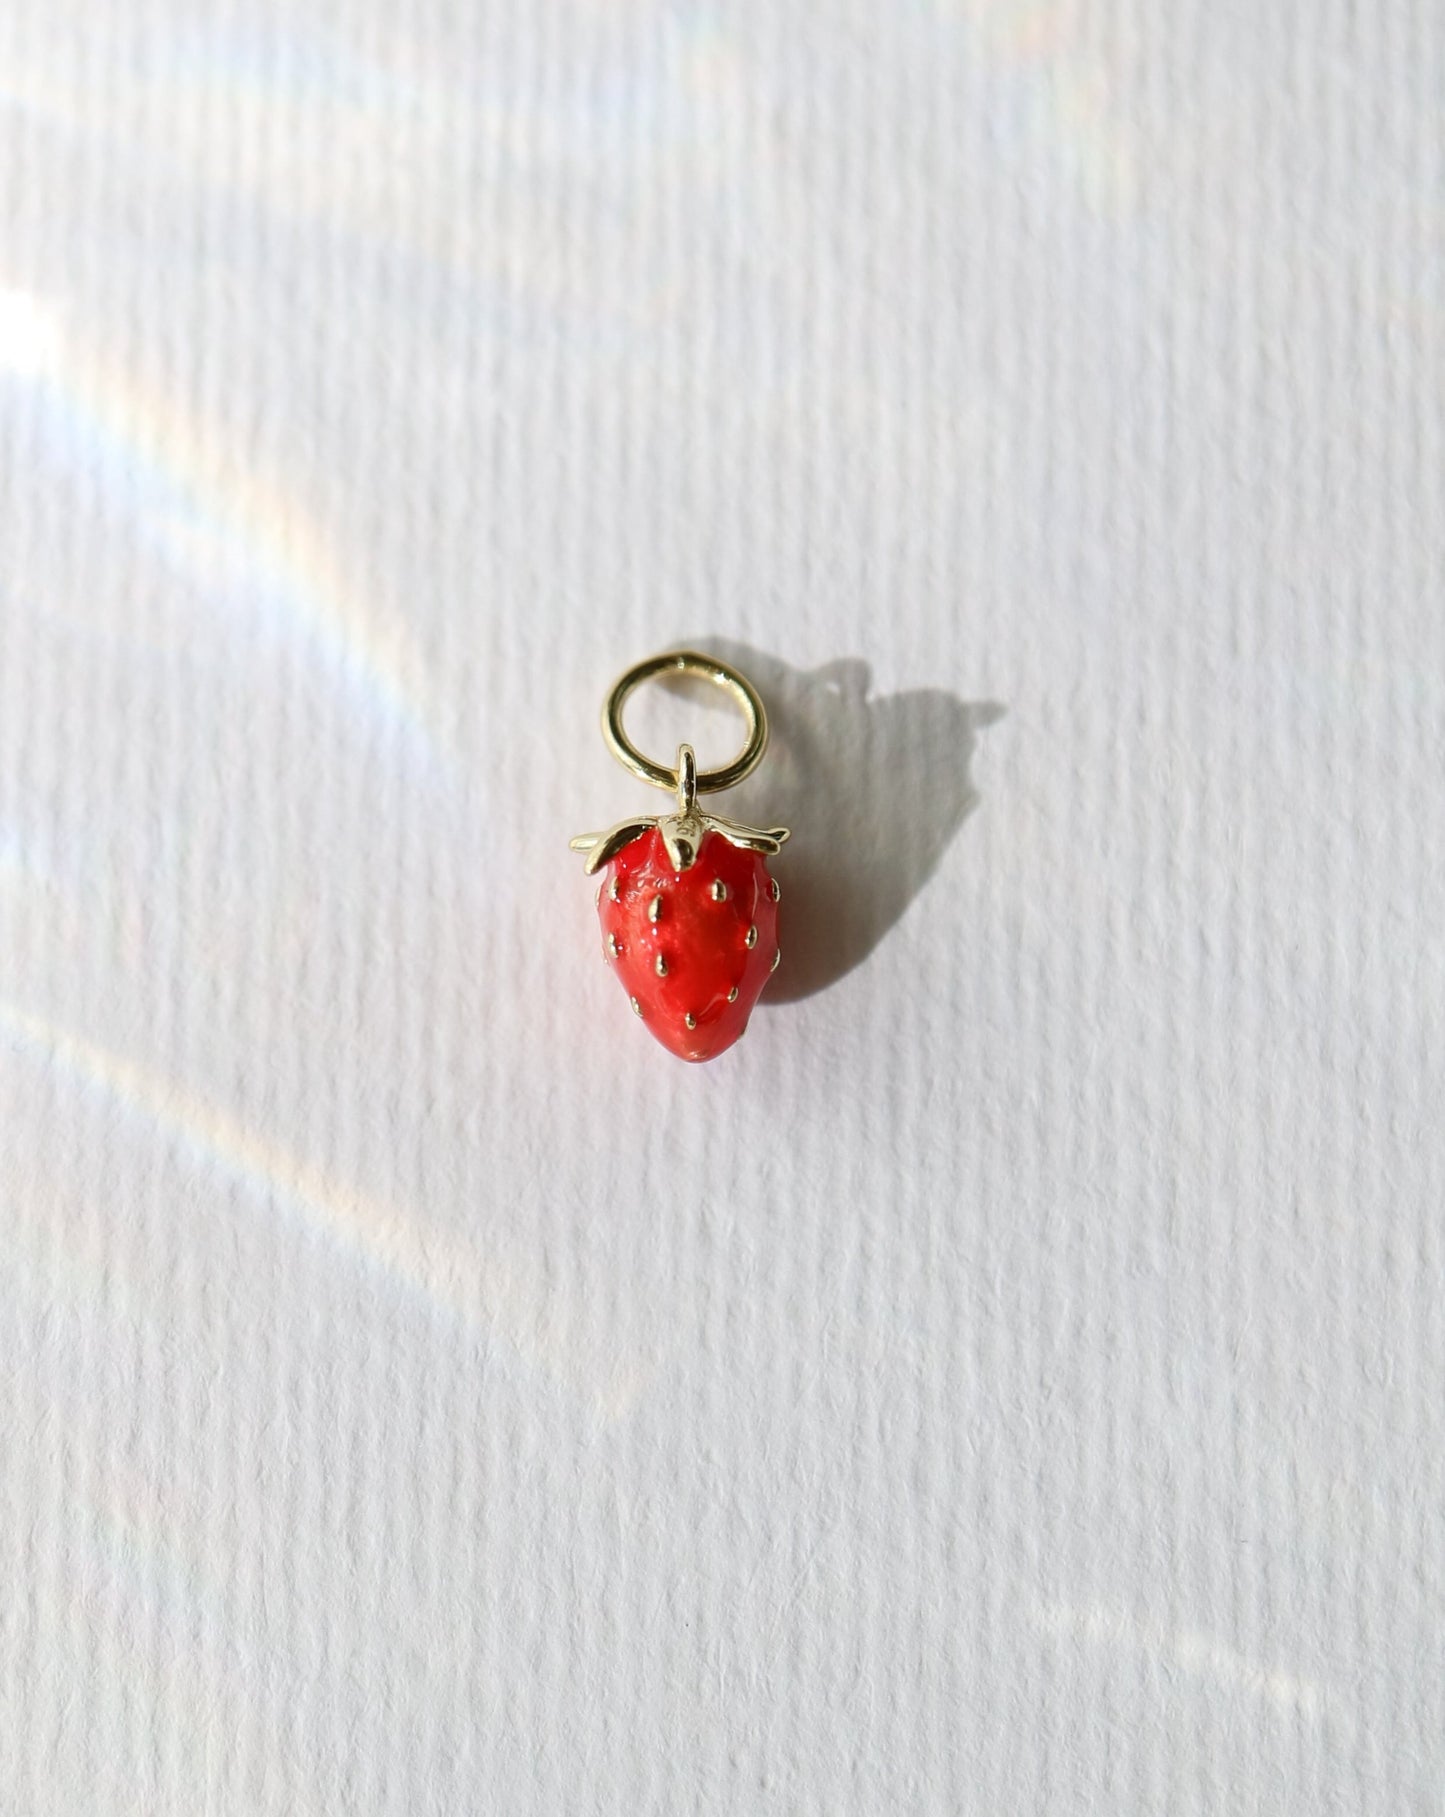 Strawberry charms for jewelry